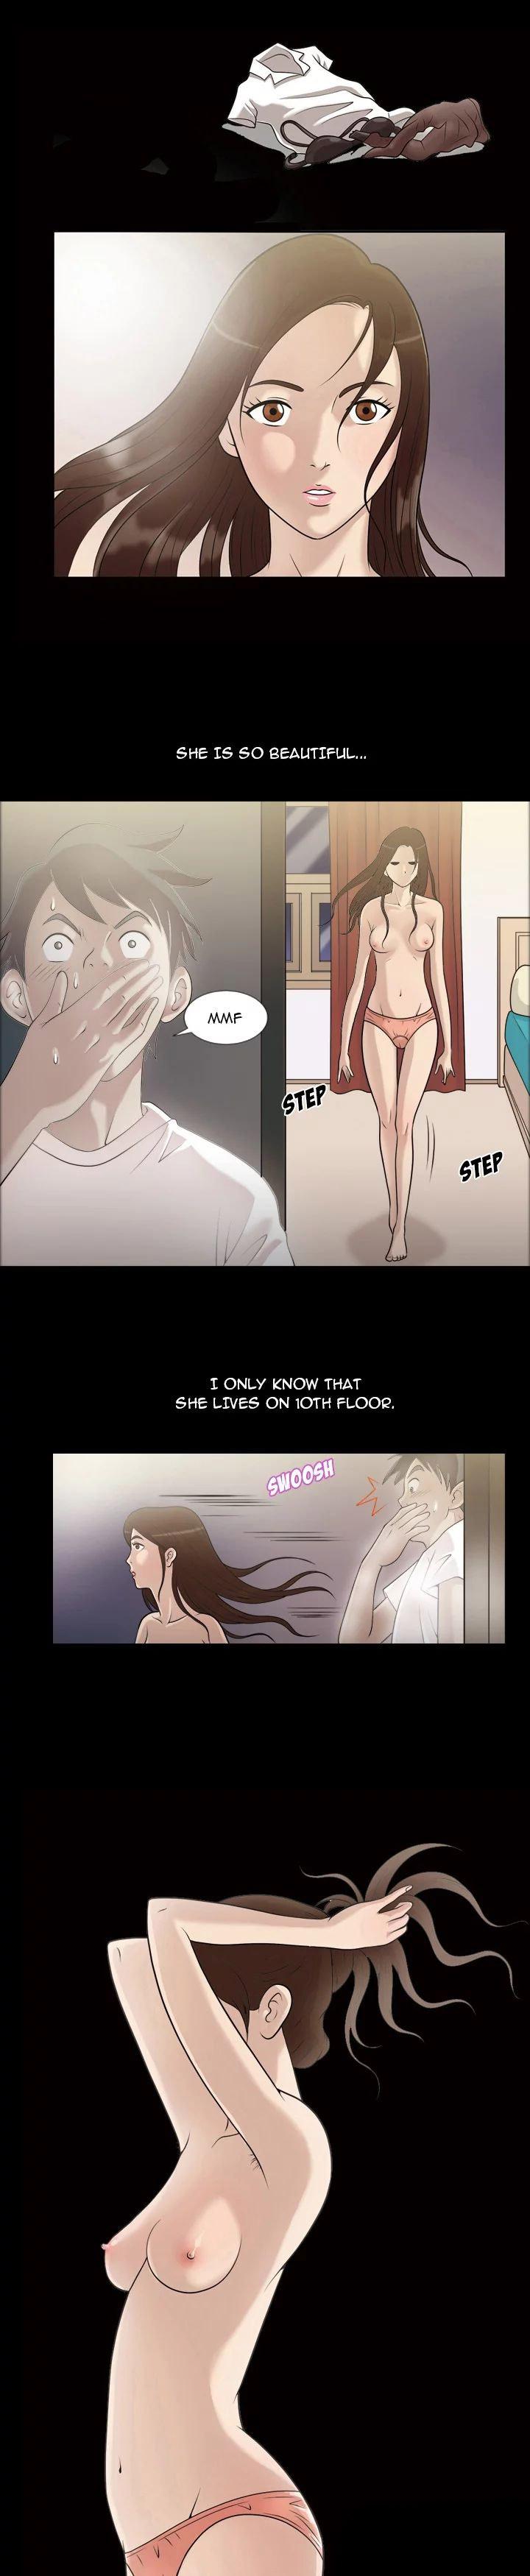 Footjob Her Voice • Chapter 1: The girl of the tenth - Original Amature Allure - Page 9